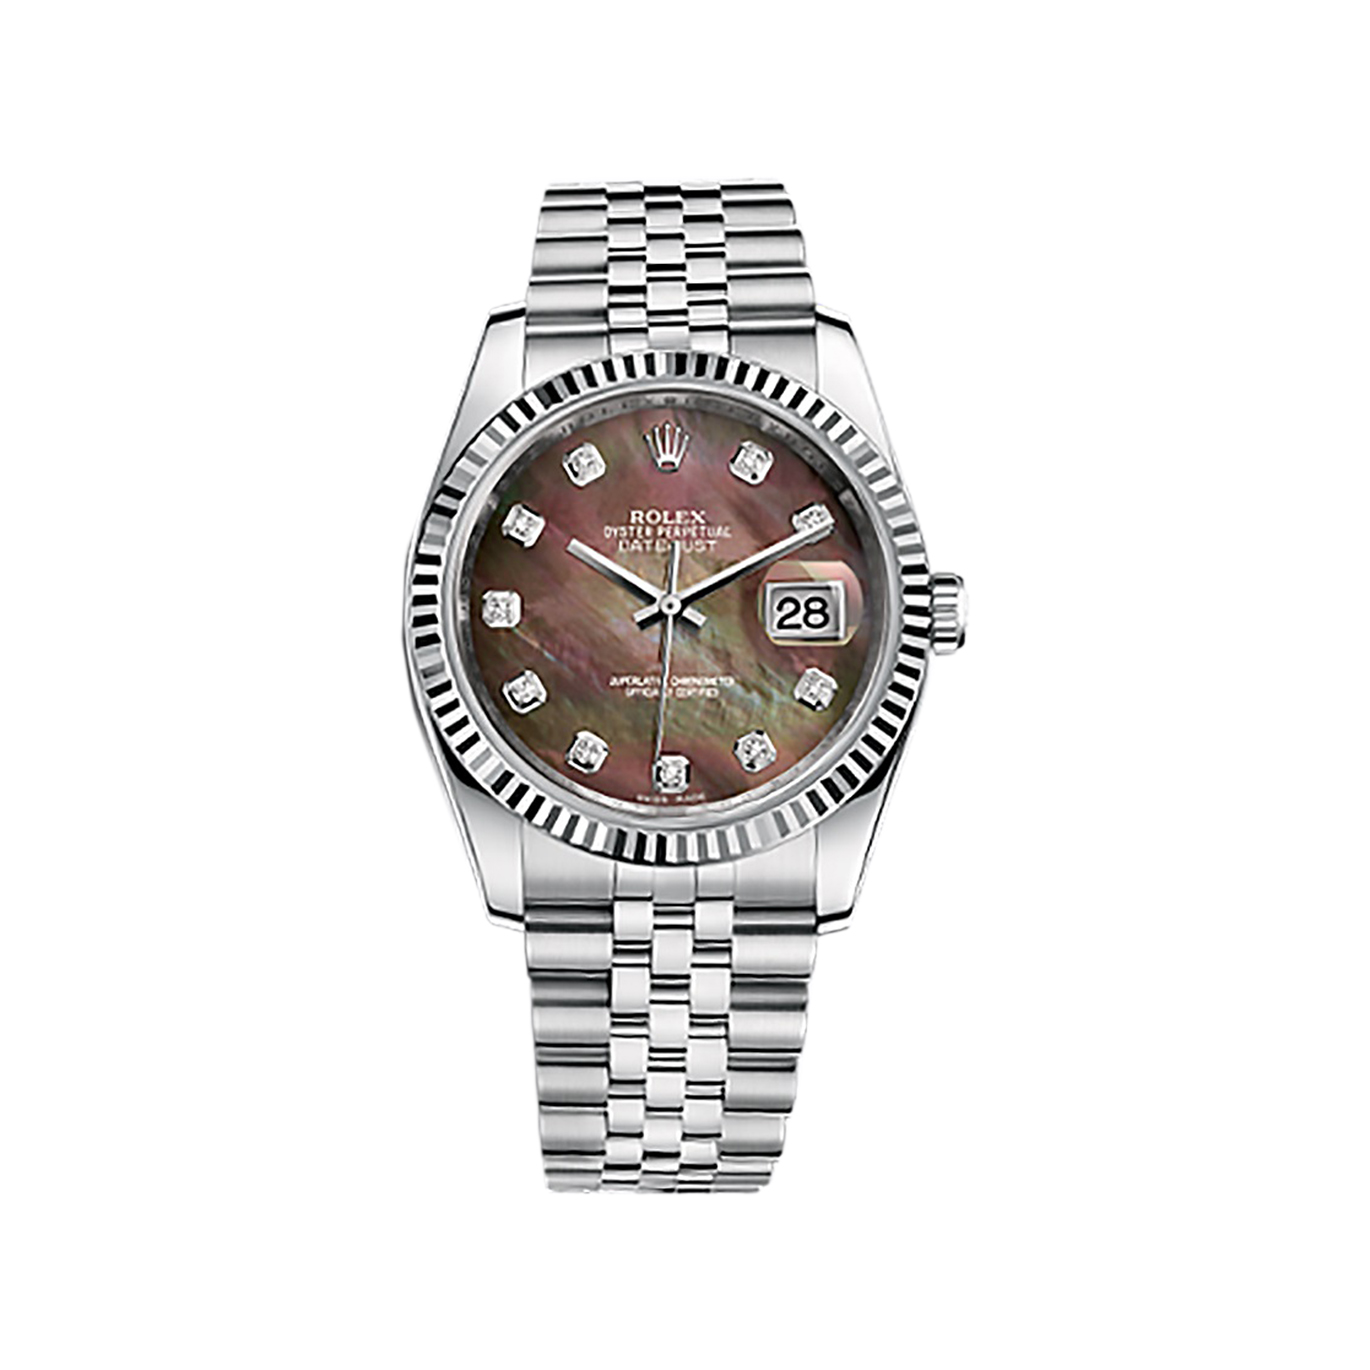 Datejust 36 116234 White Gold & Stainless Steel Watch (Black Mother-of-Pearl Set with Diamonds) - Click Image to Close